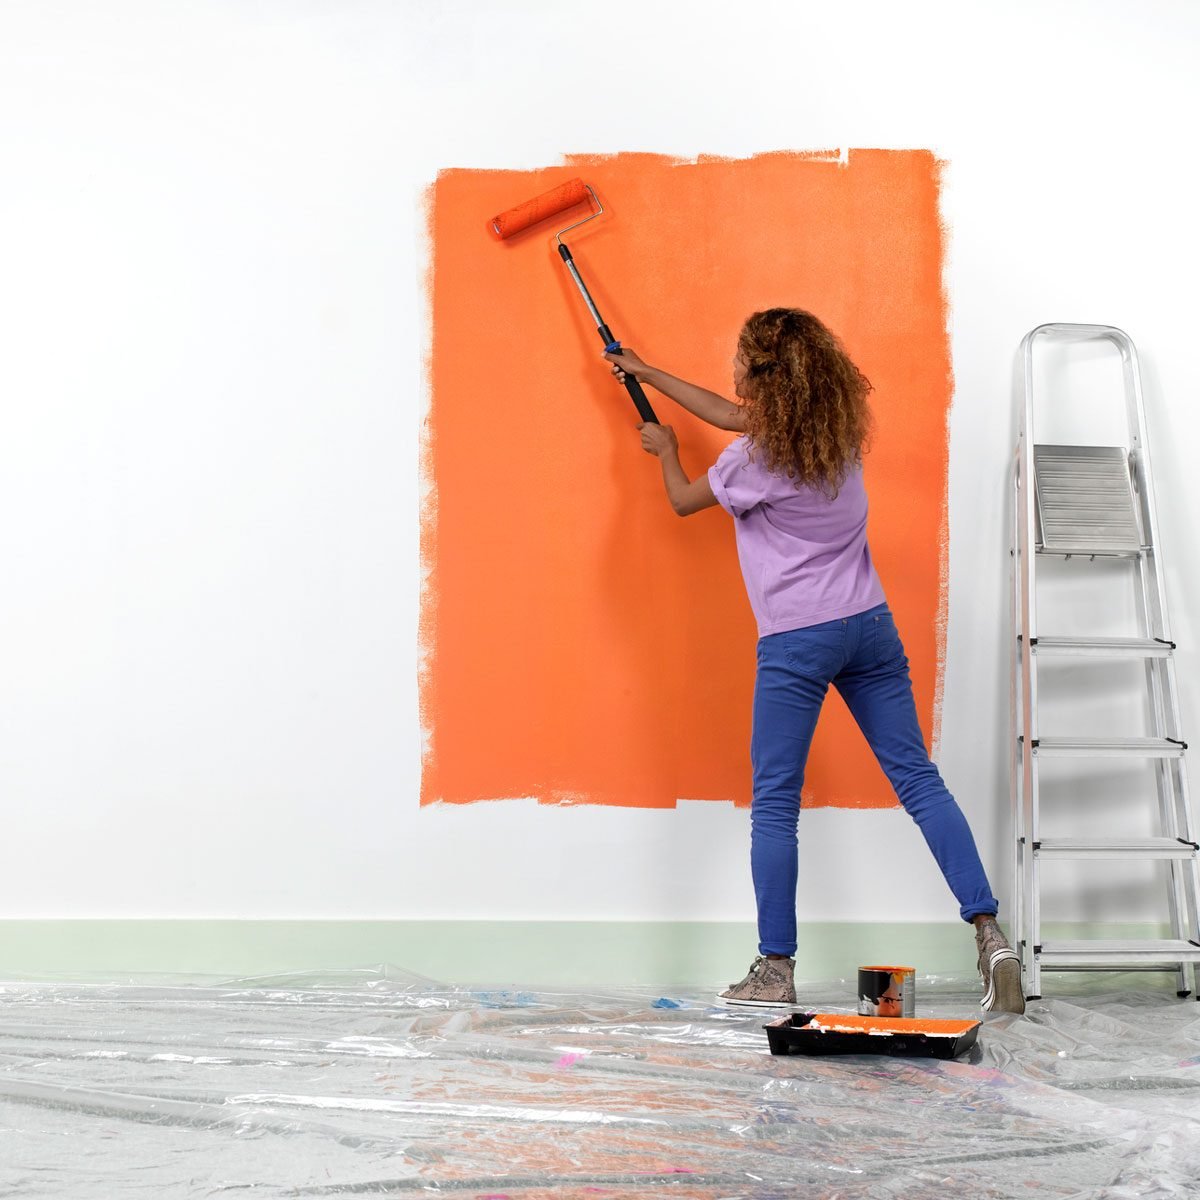 Repaint-Your-Interior A List of Ways to Keep Your Home Feeling Happy and Healthy This Year